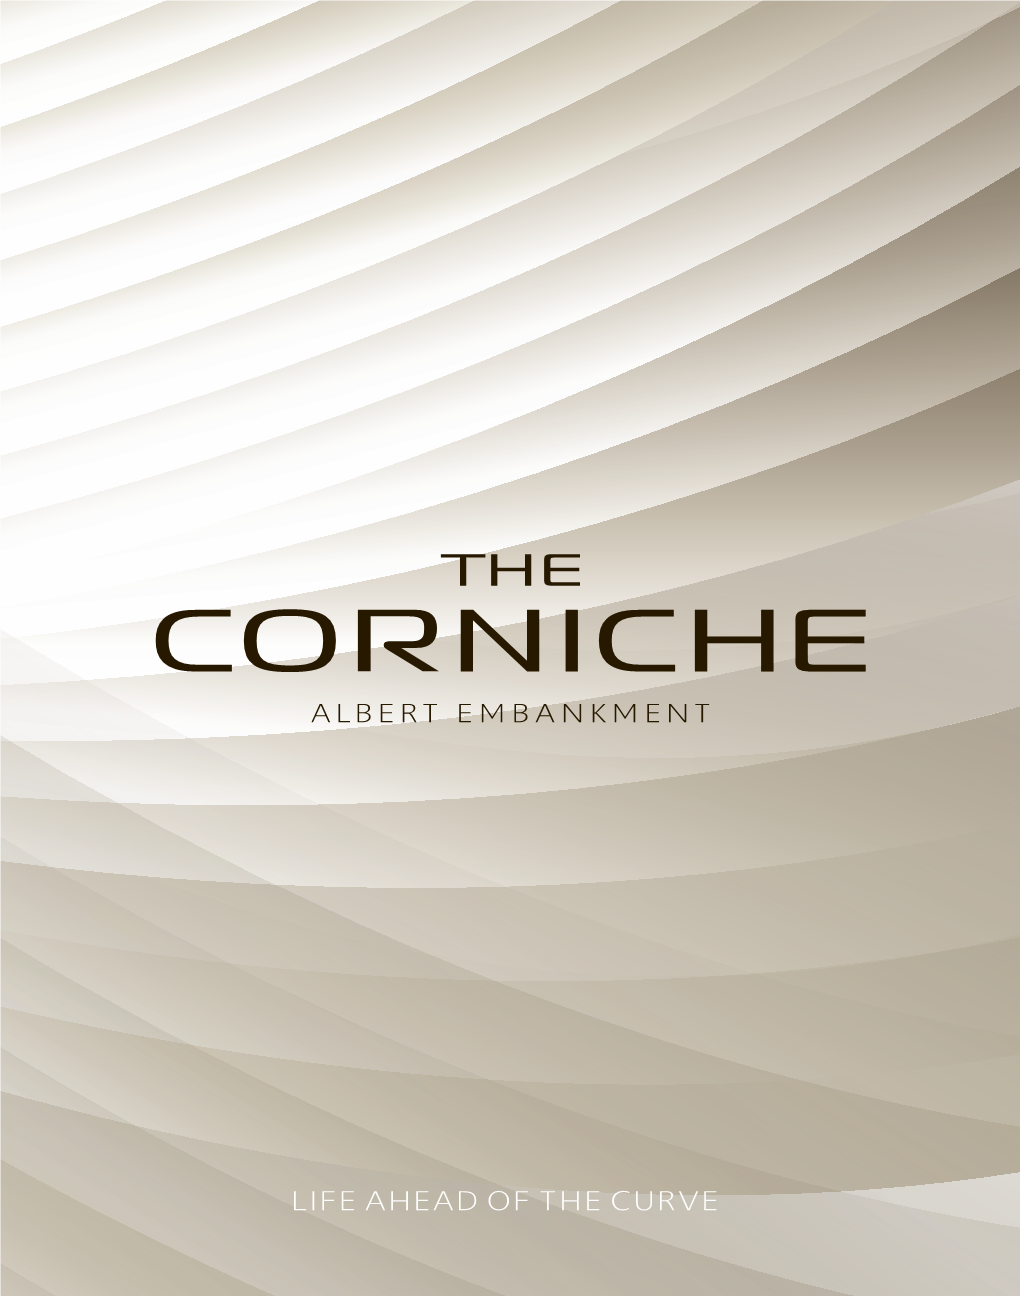 Life Ahead of the Curve Welcome to the Corniche